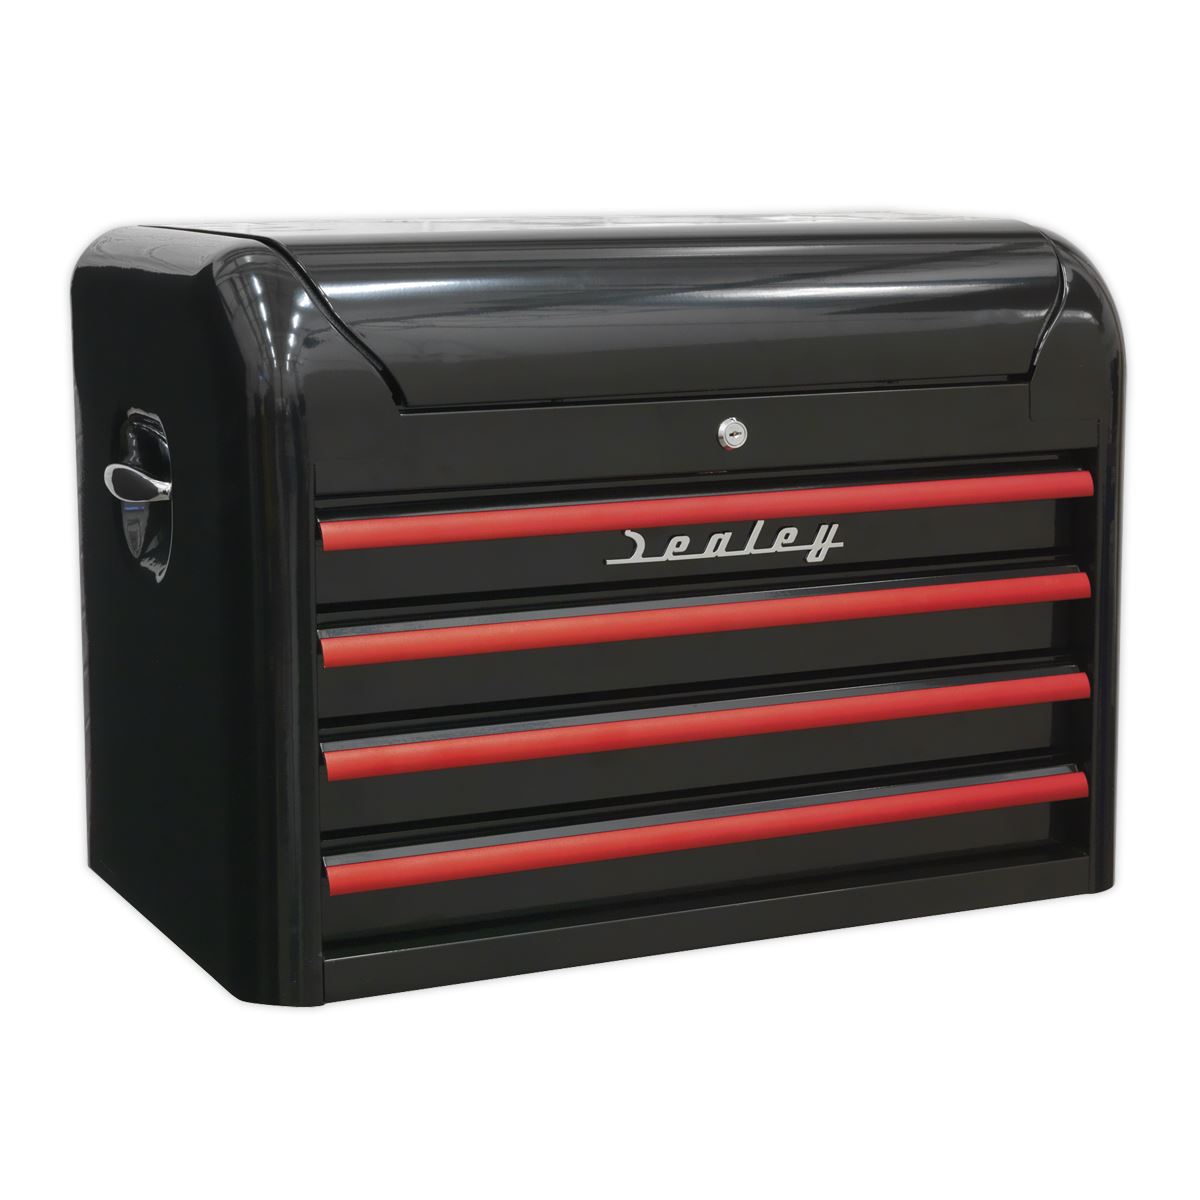 Sealey Premier Topchest 4 Drawer Retro Style - Black with Red Anodised Drawer Pulls